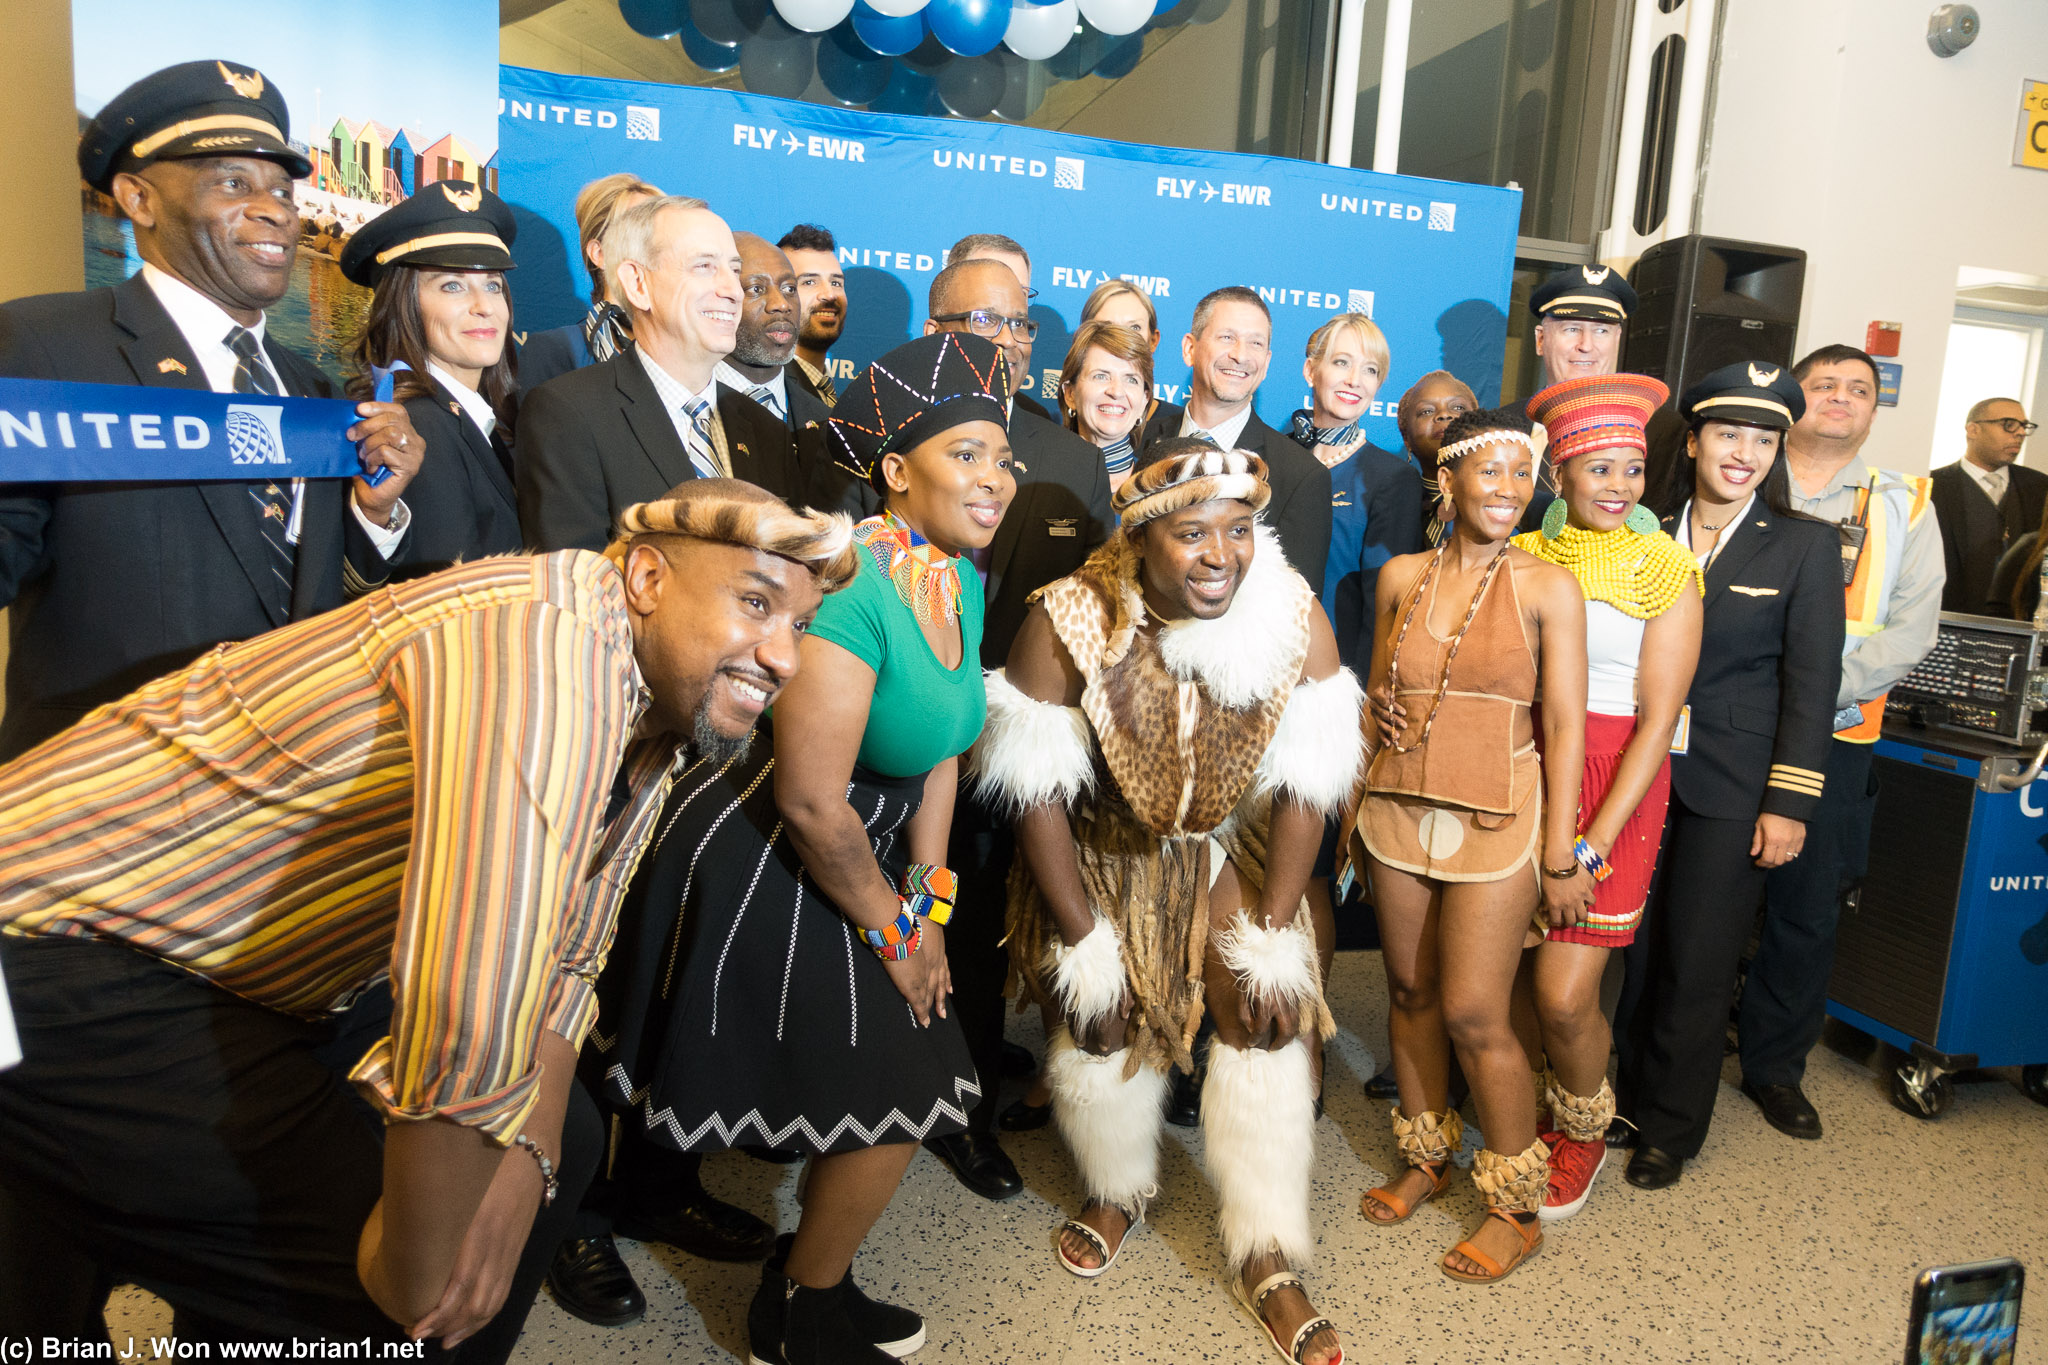 Everyone in the picture-- flight crew, United management, VIPs, and the dancers!